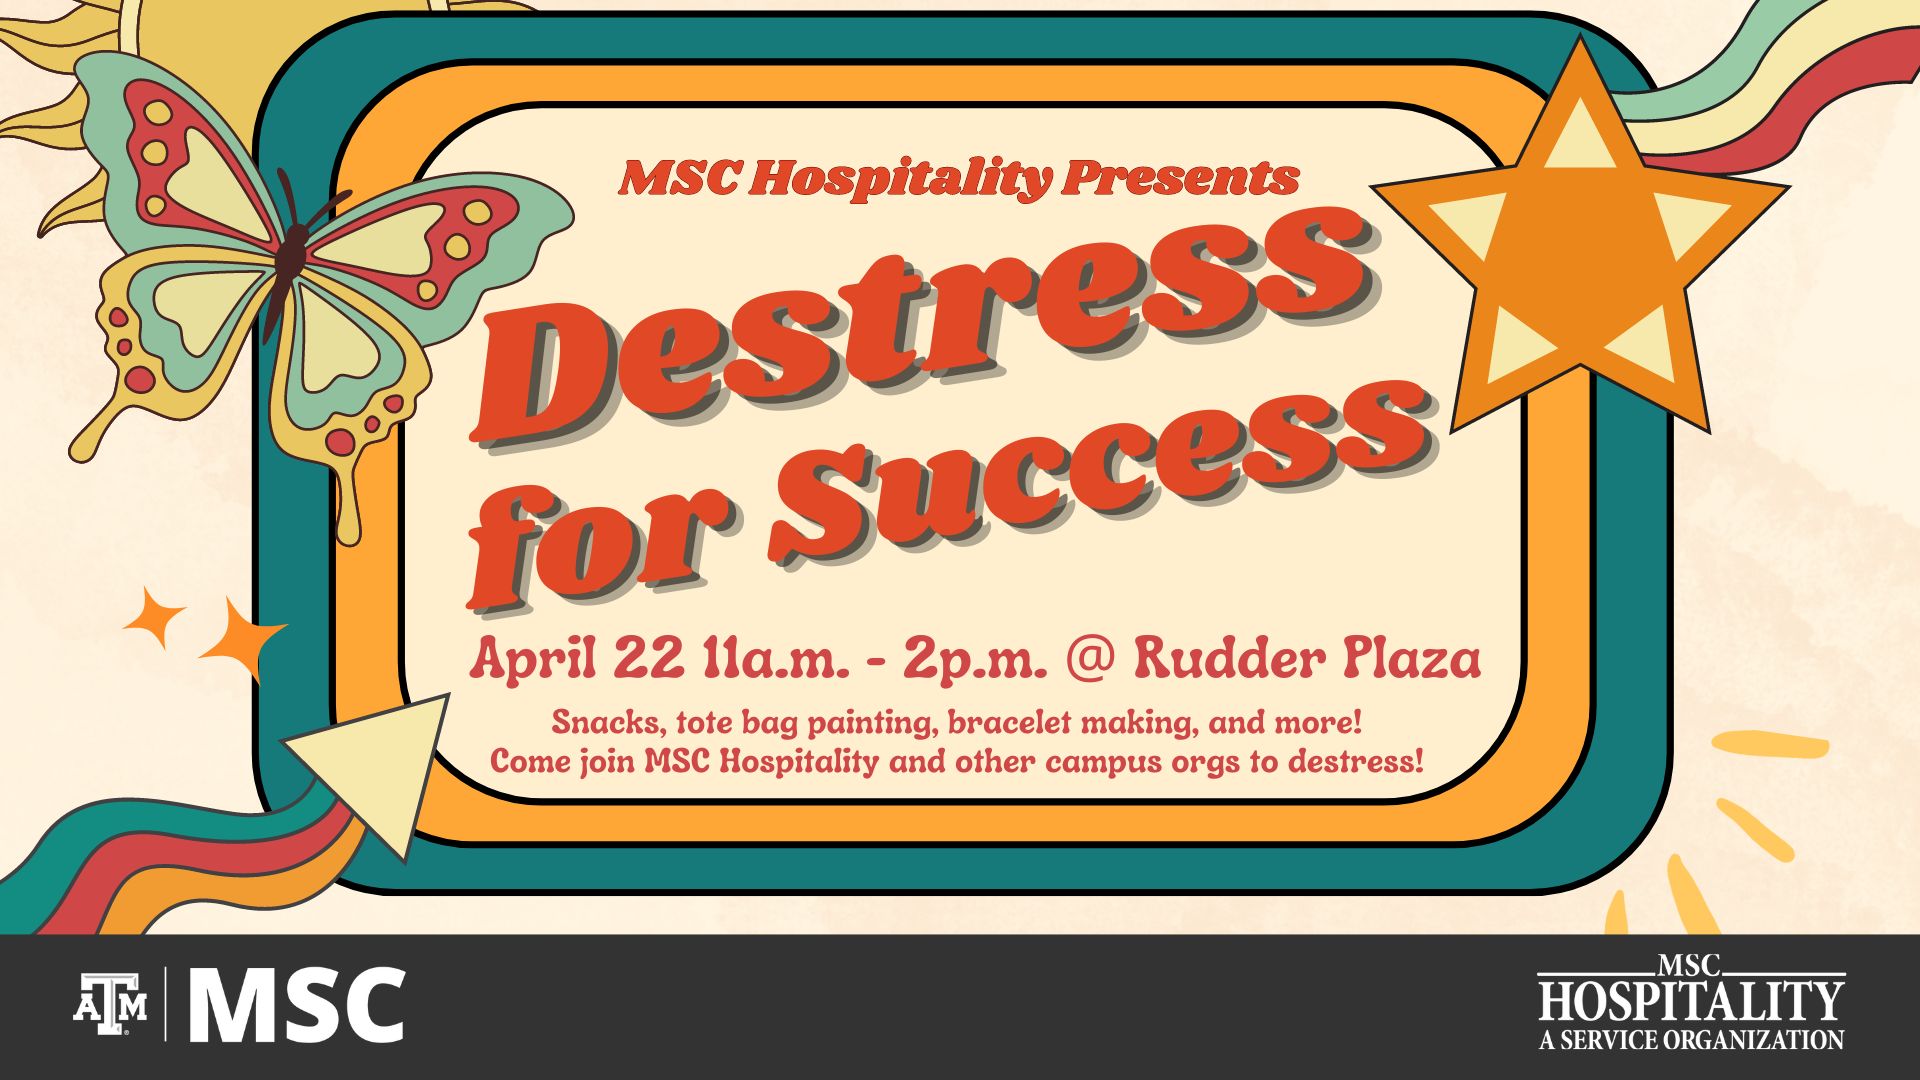 MSC Hospitality presents Destress for Success, April 22 from 11 a.m. to 2 p.m. at Rudder Plaza. Snacks, tote bag painting, bracelet making, and more! Come join MSC Hospitality and other campus orgs to destress!